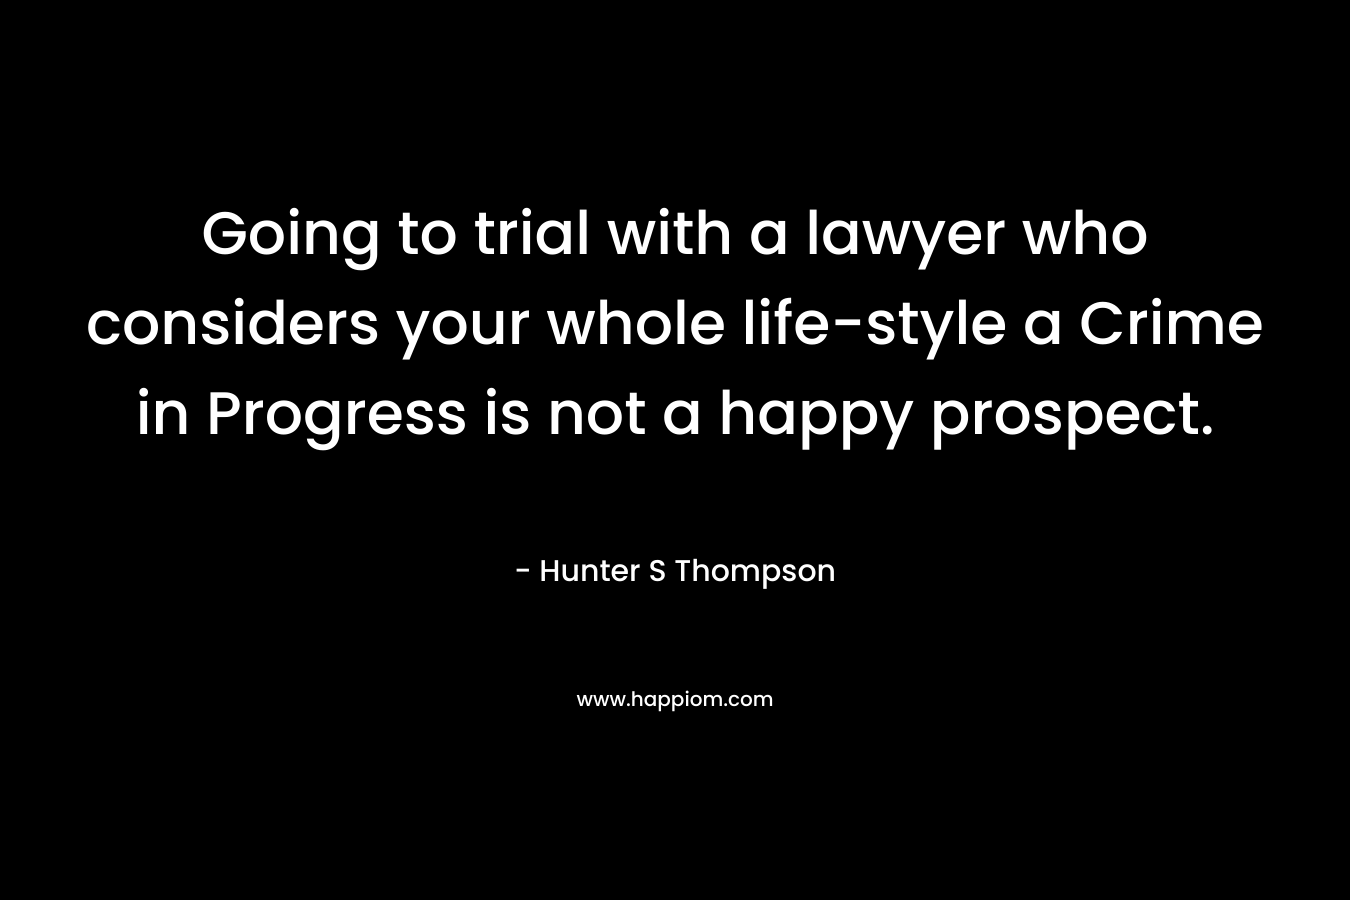 Going to trial with a lawyer who considers your whole life-style a Crime in Progress is not a happy prospect.